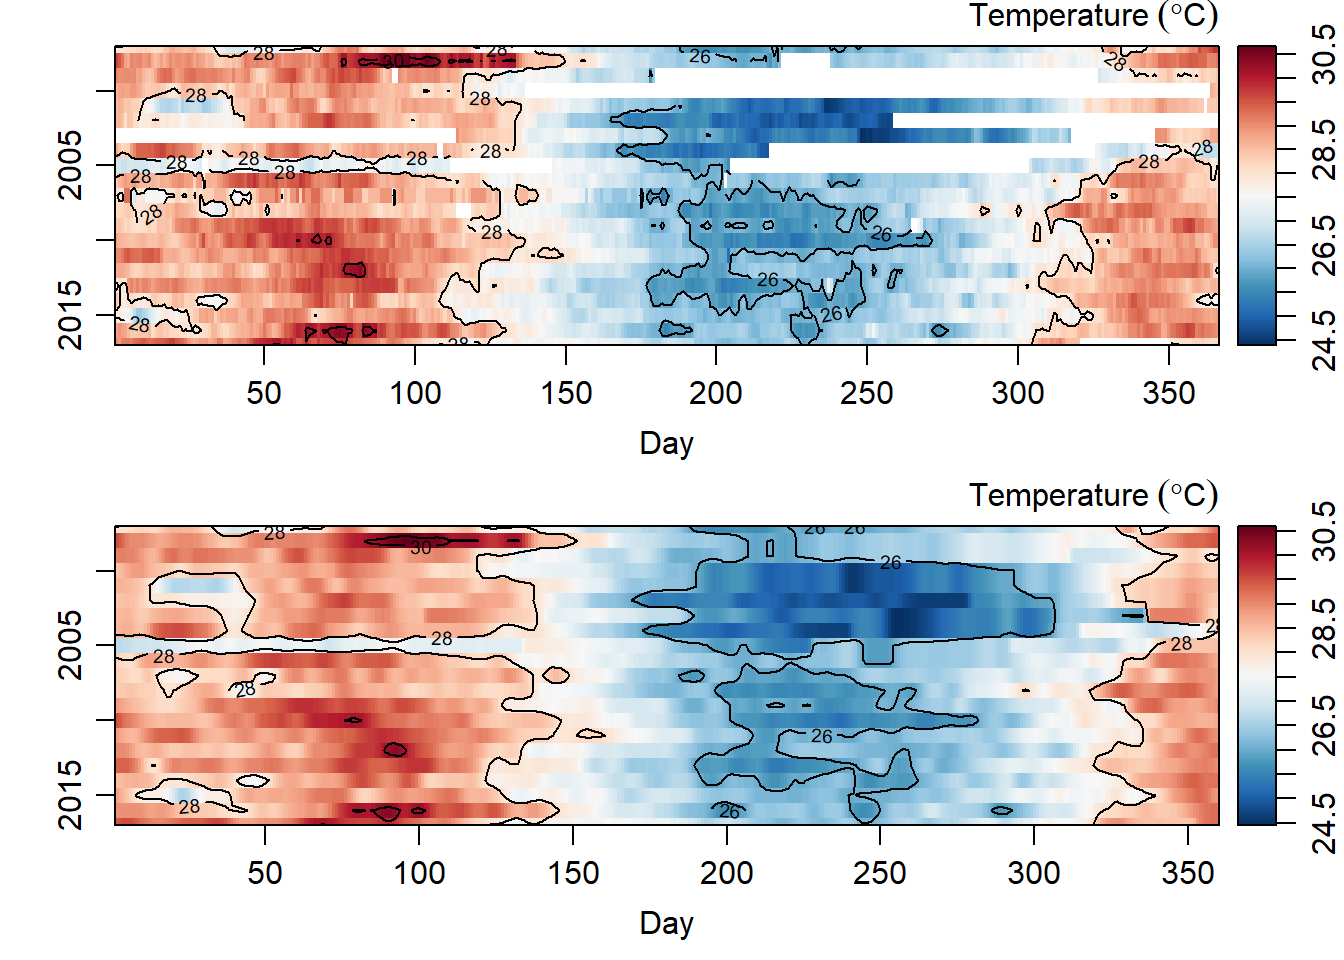 Temperature values for origin data (top panel) and interpolated values (bottom panel)